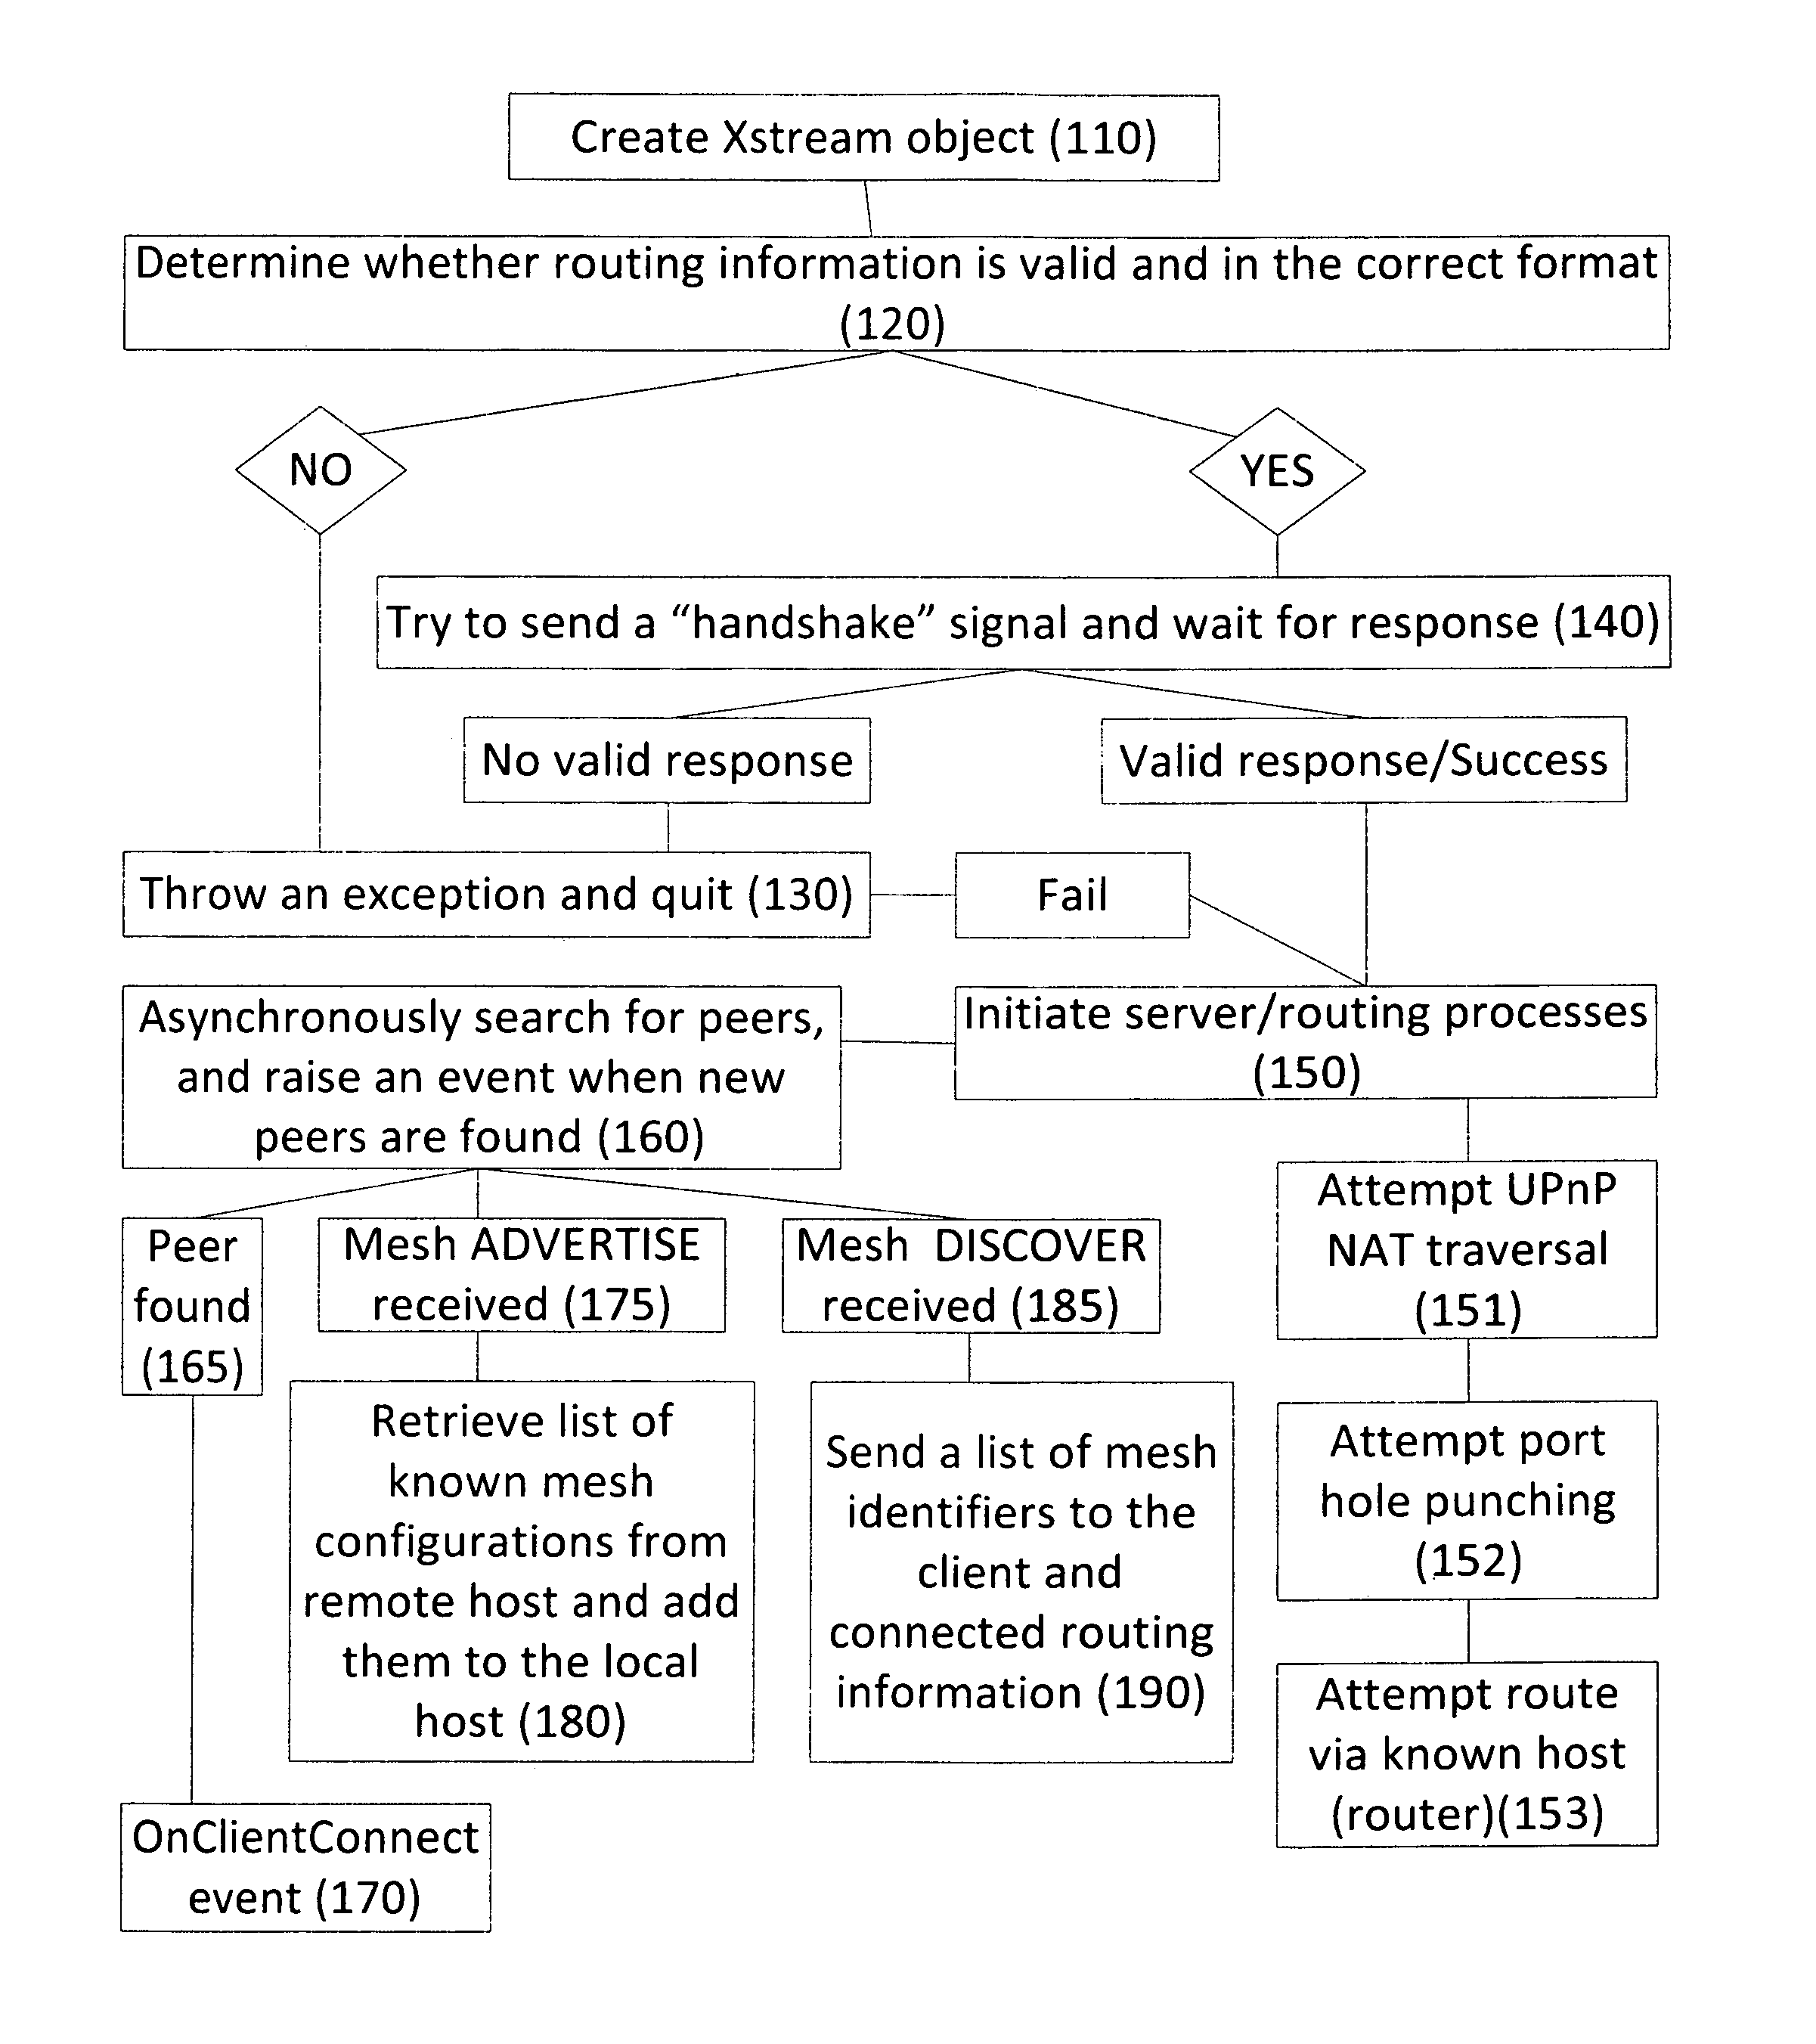 Global grid protocal, a system and method for establishing and simplifying peer-to-peer networking connections among a plurality of computers and divices by dynamically generating identifiers and performing routing and traversal processes